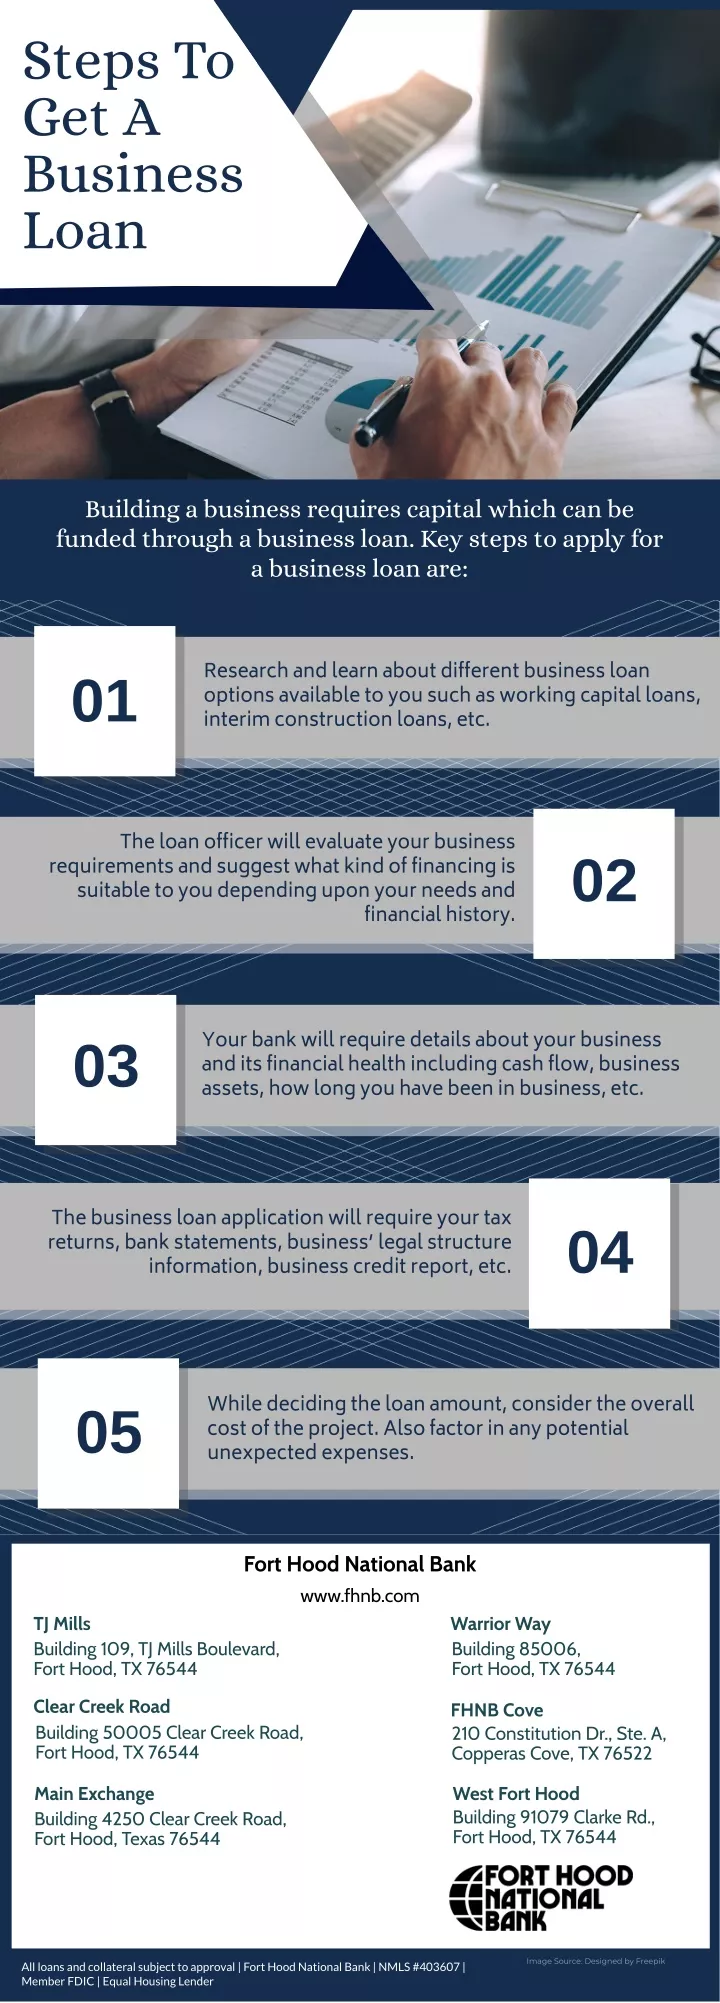 steps to get a business loan